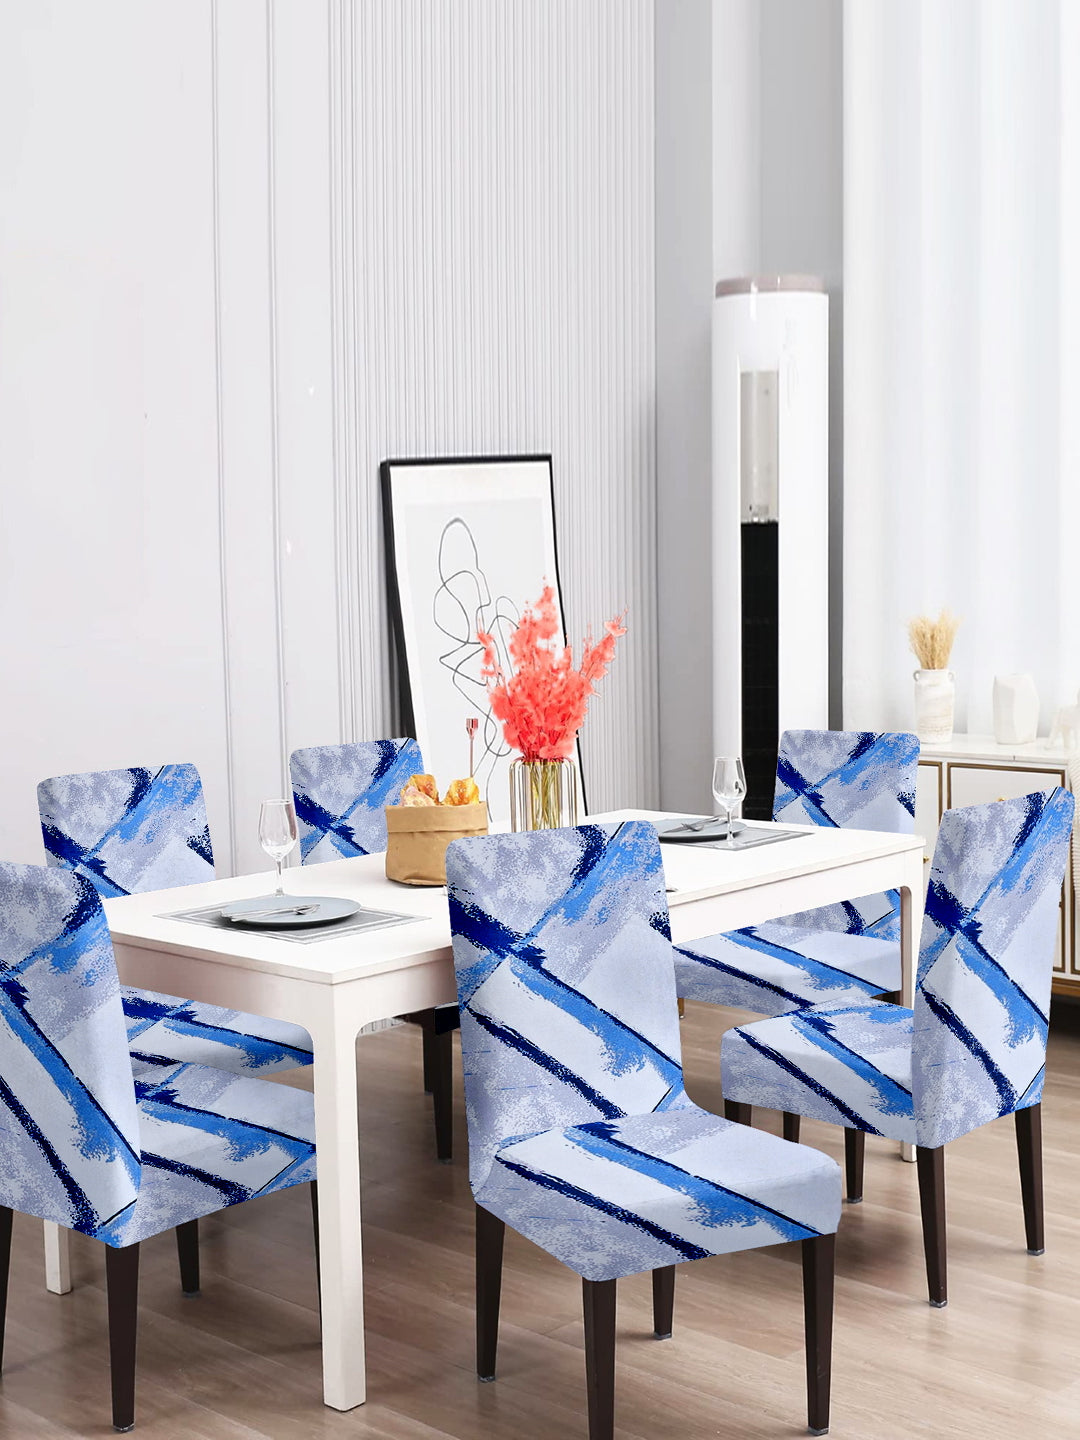 Elastic Geometric Printed Non-Slip Dining Chair Covers Set of 6 - Blue